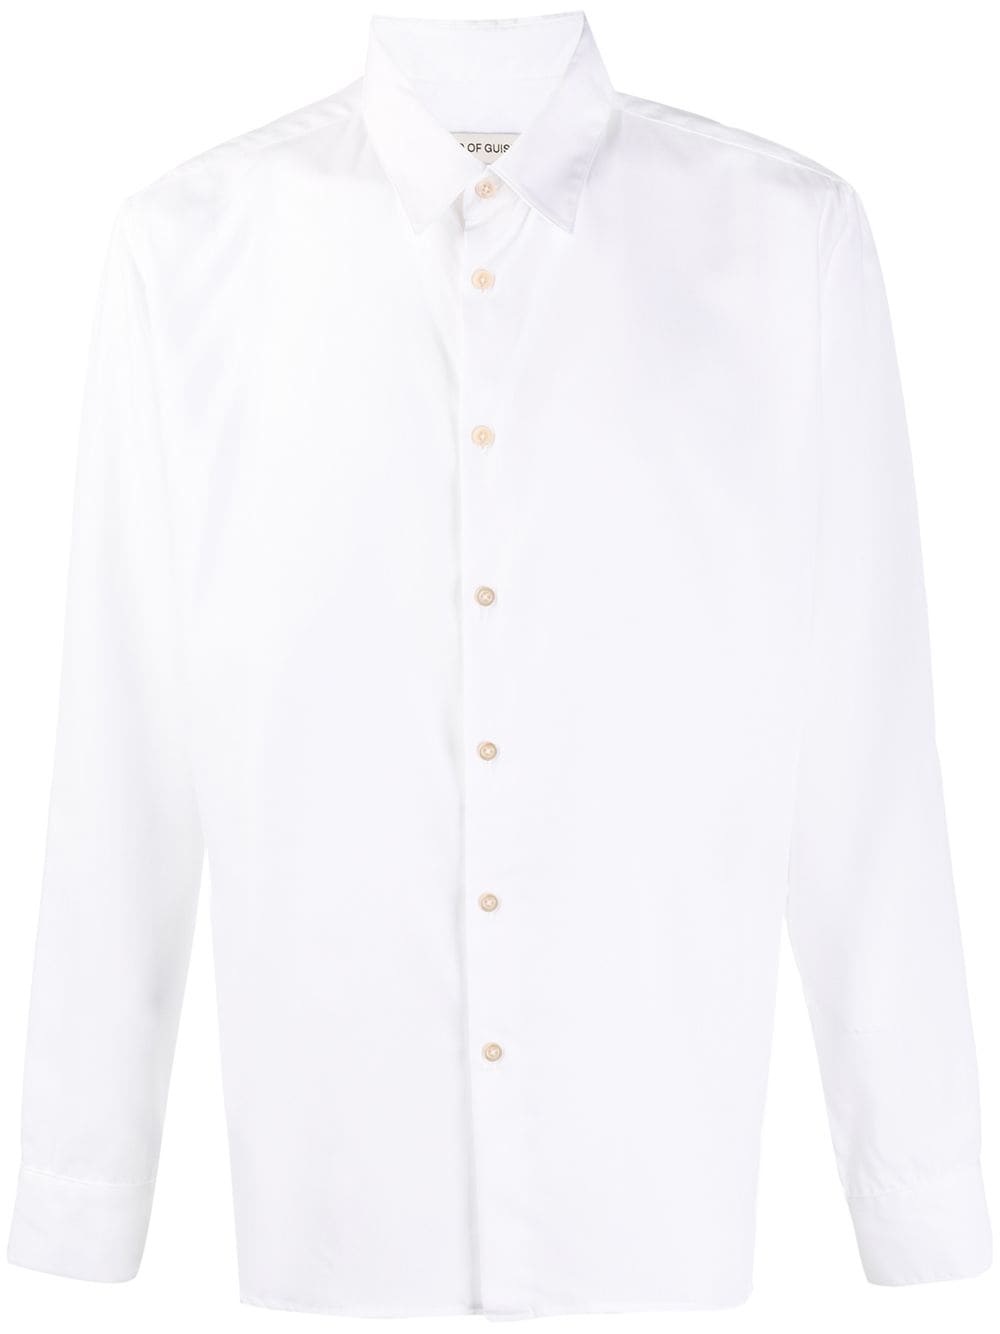 A Kind Of Guise Long-sleeve Dress Shirt In White